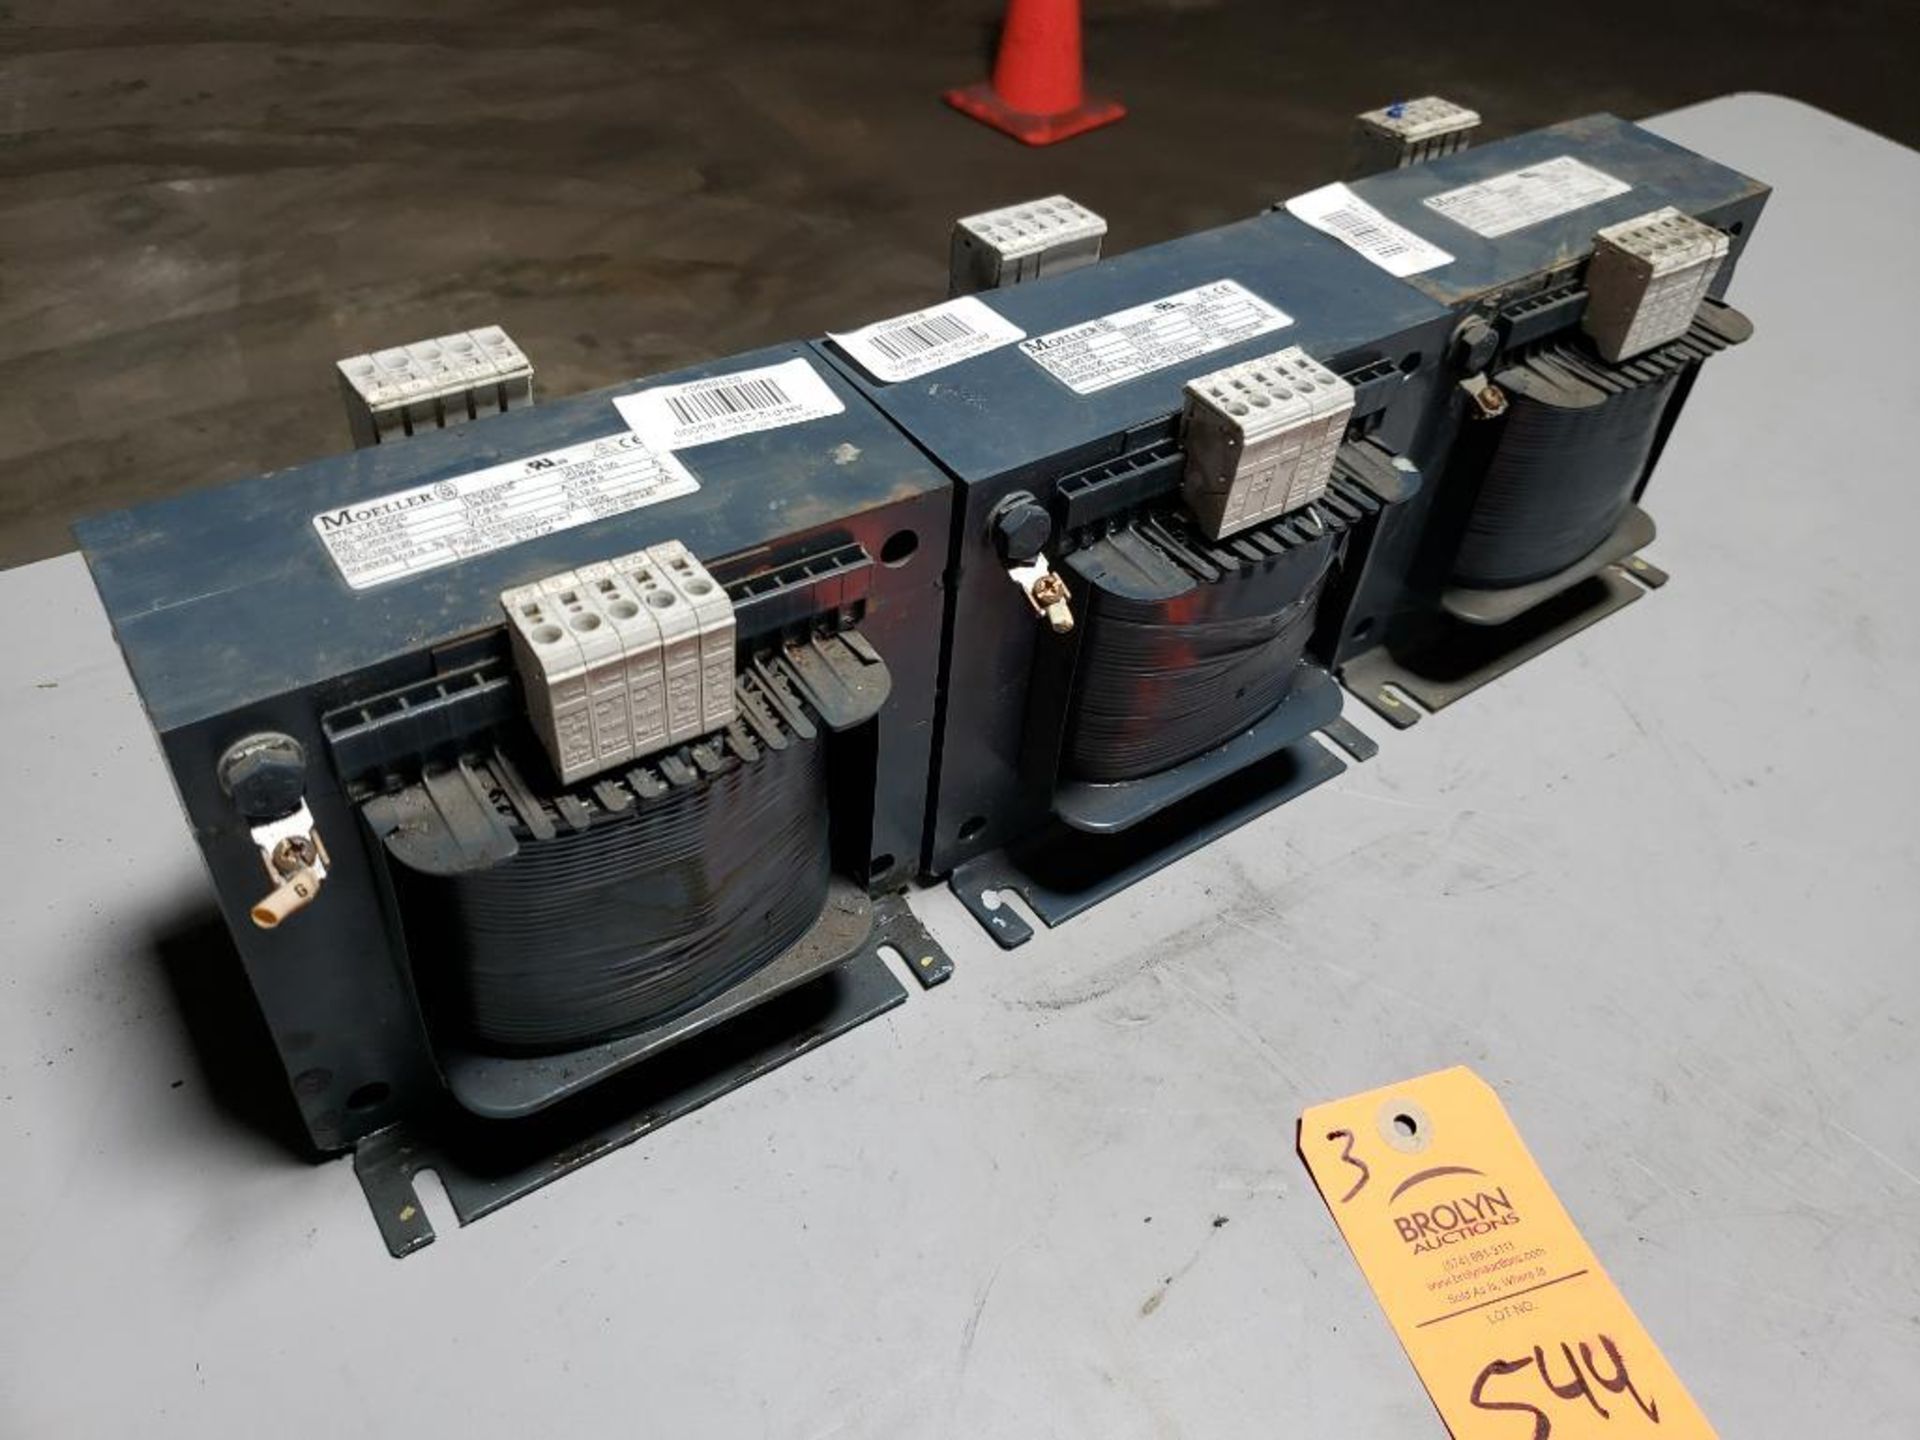 Qty 3 - Moeller STN 1.6 S005 single phase control transformer.